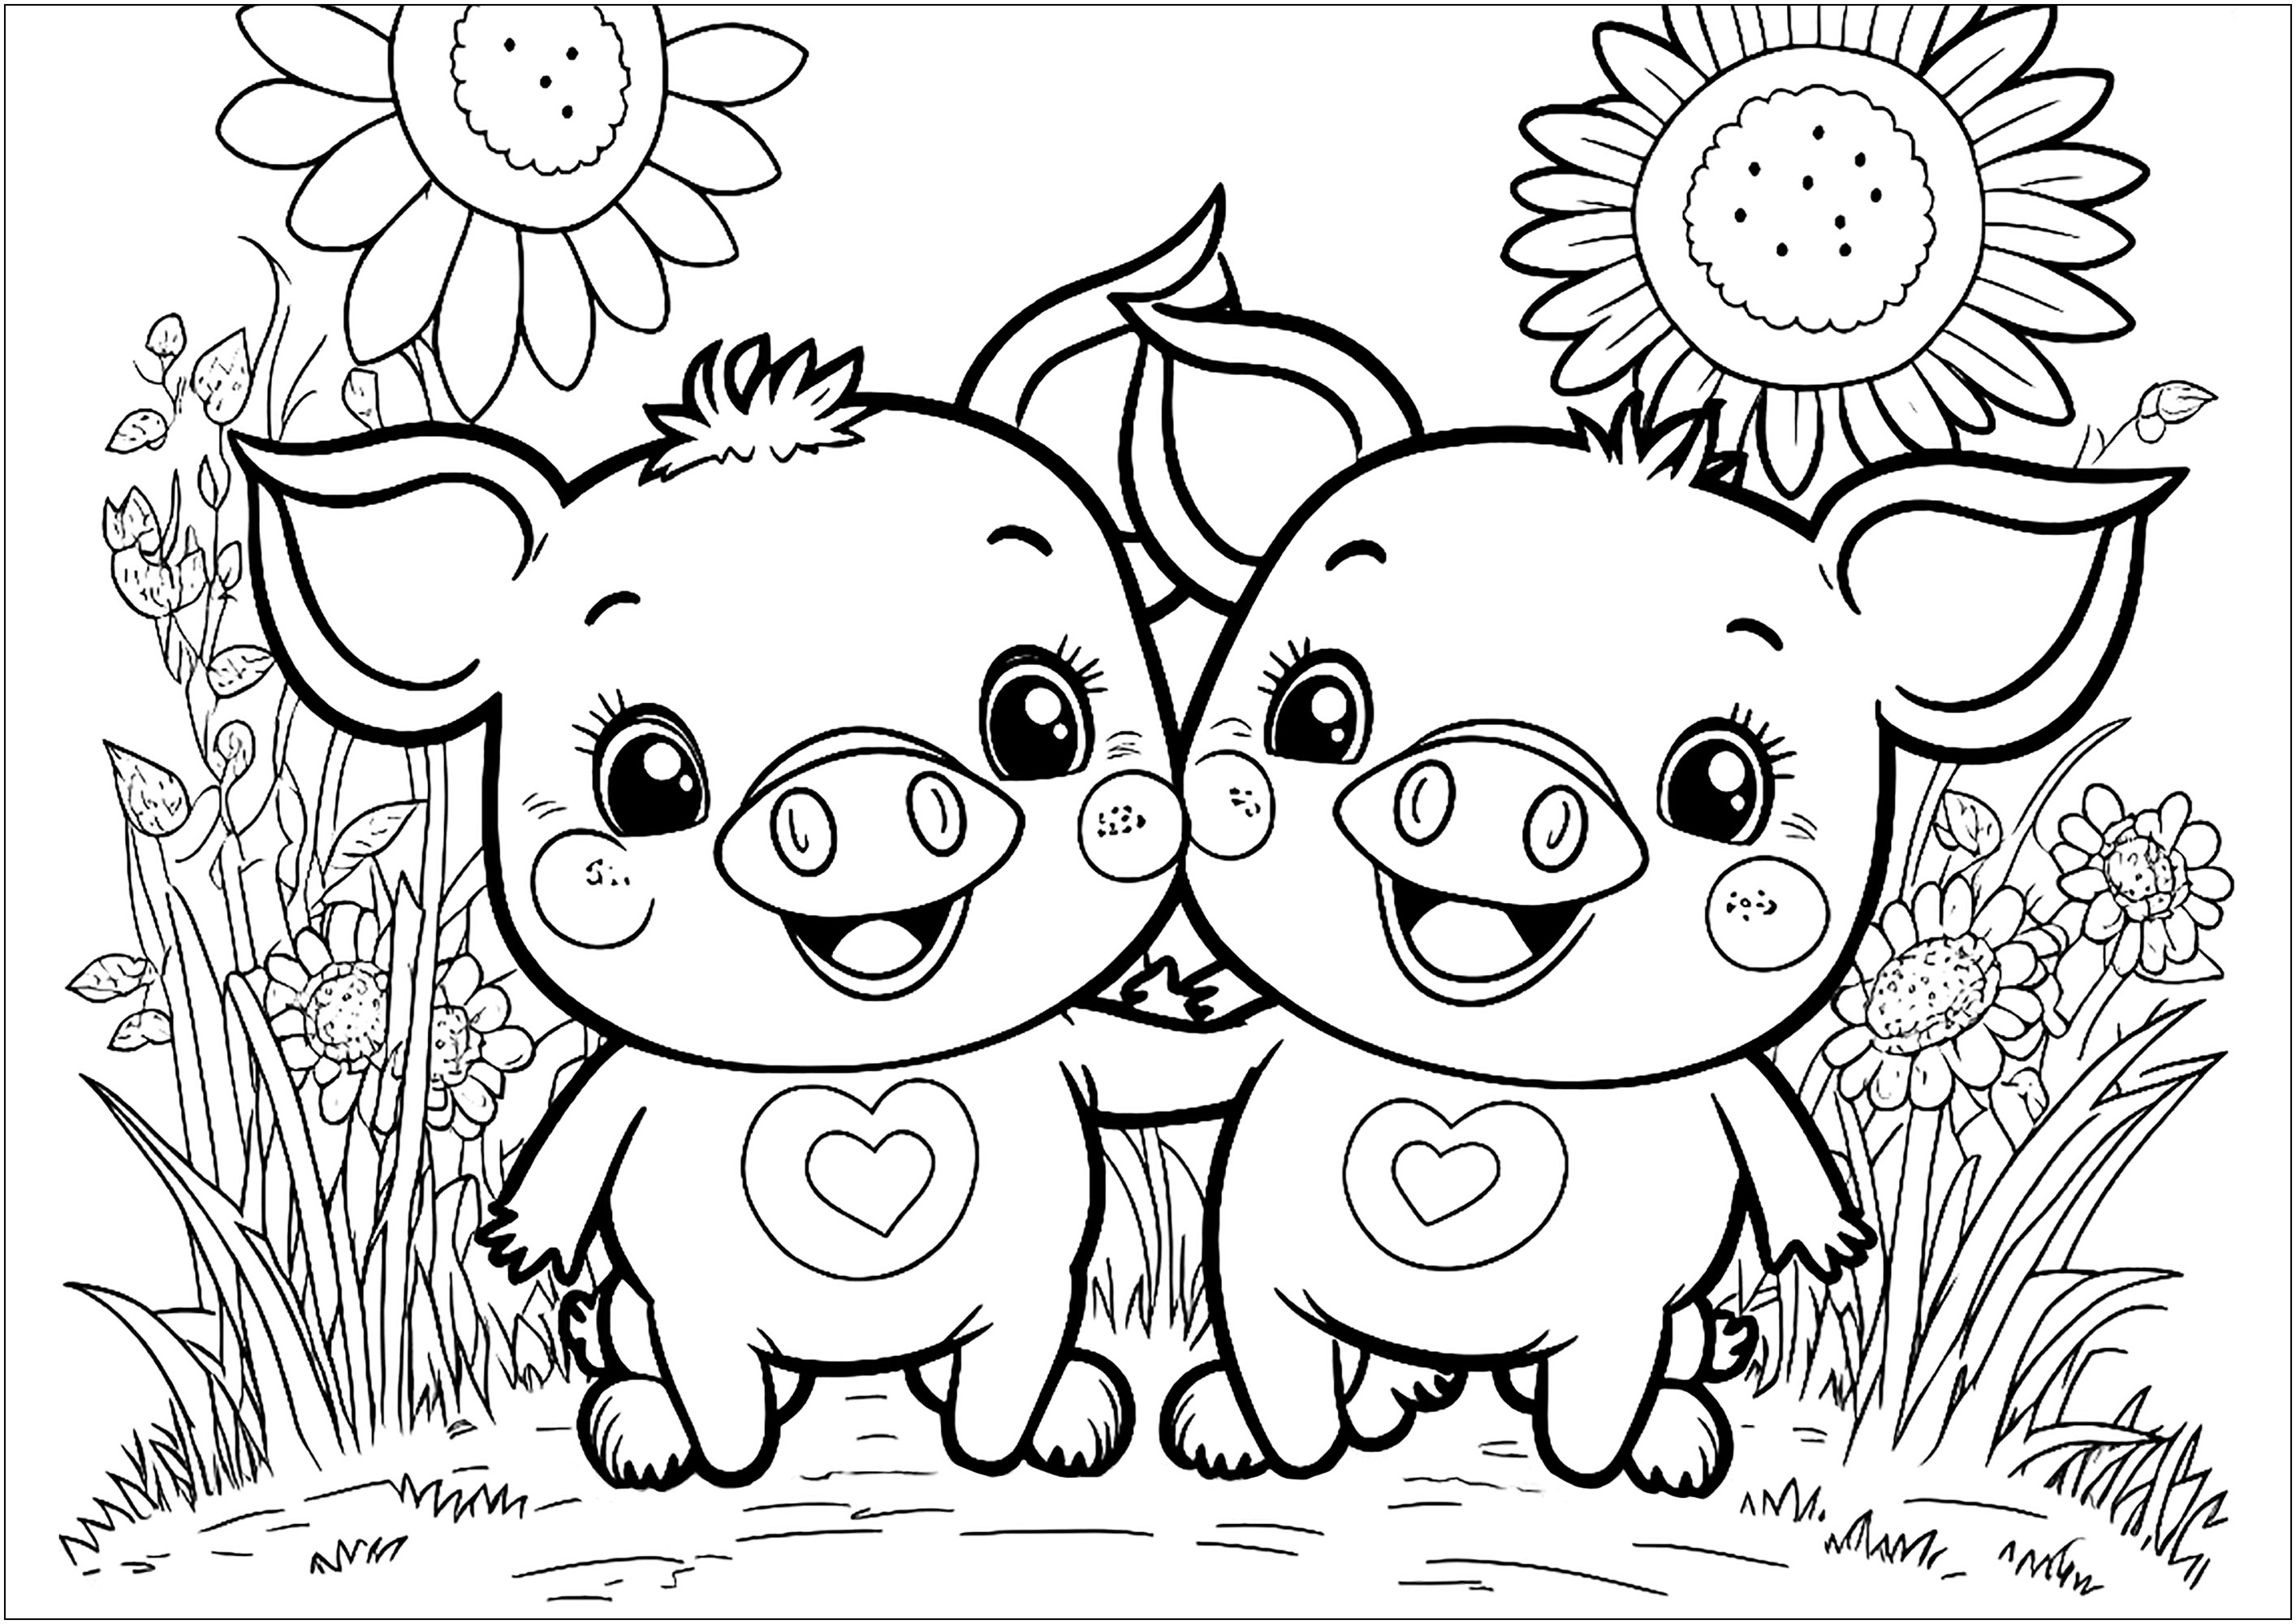 Two friendly pigs to color